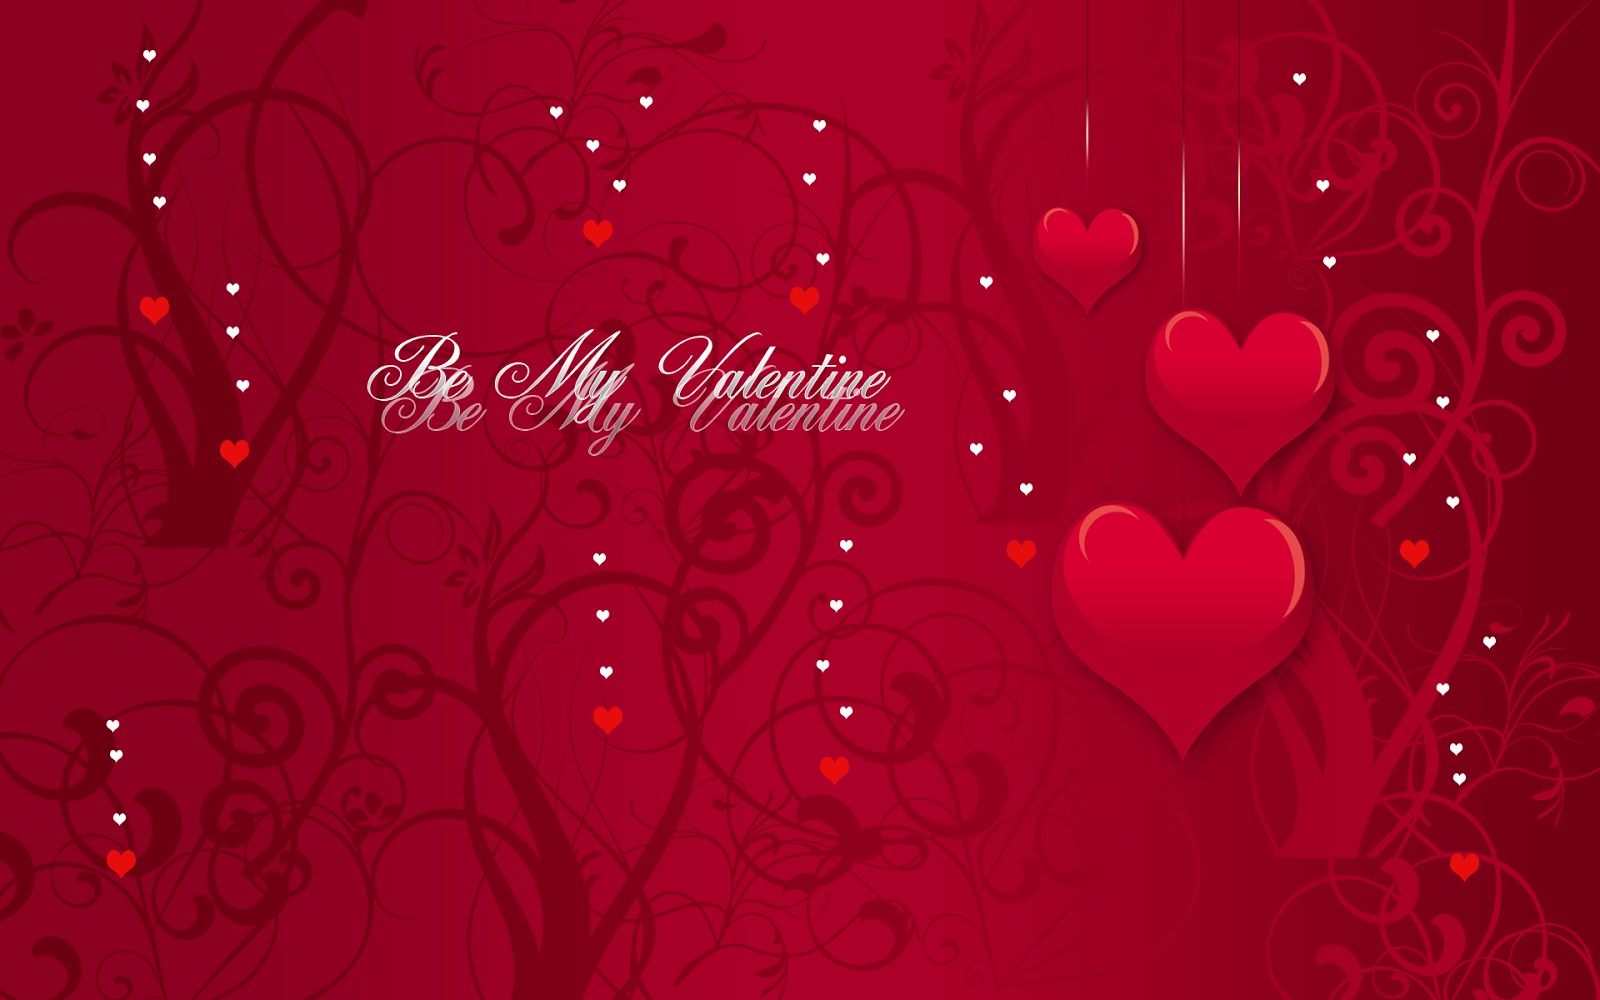 Best and Beautiful Valentine's day wallpaper HD Printable Desktop Free Download